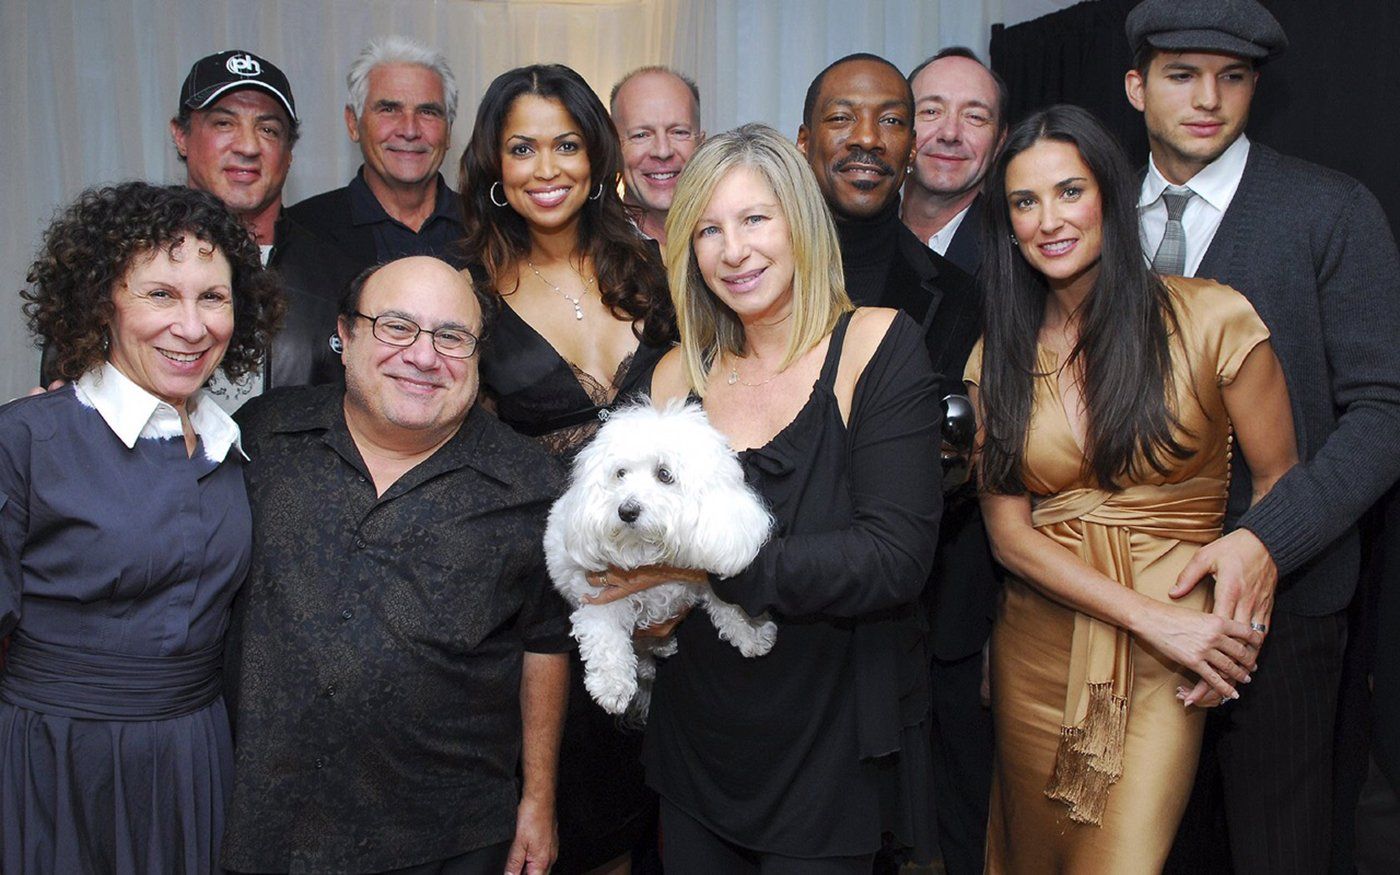 Backstage at Planet Hollywood. BACK ROW: Sylvester Stallone, James Brolin, Tracey Edmonds, Bruce Willis, Eddie Murphy, Kevin Spacey, Ashton Kutcher.  FRONT ROW: Rhea Perlman, Danny DeVito, Streisand and Demi Moore. Photo by Albert Ferreira